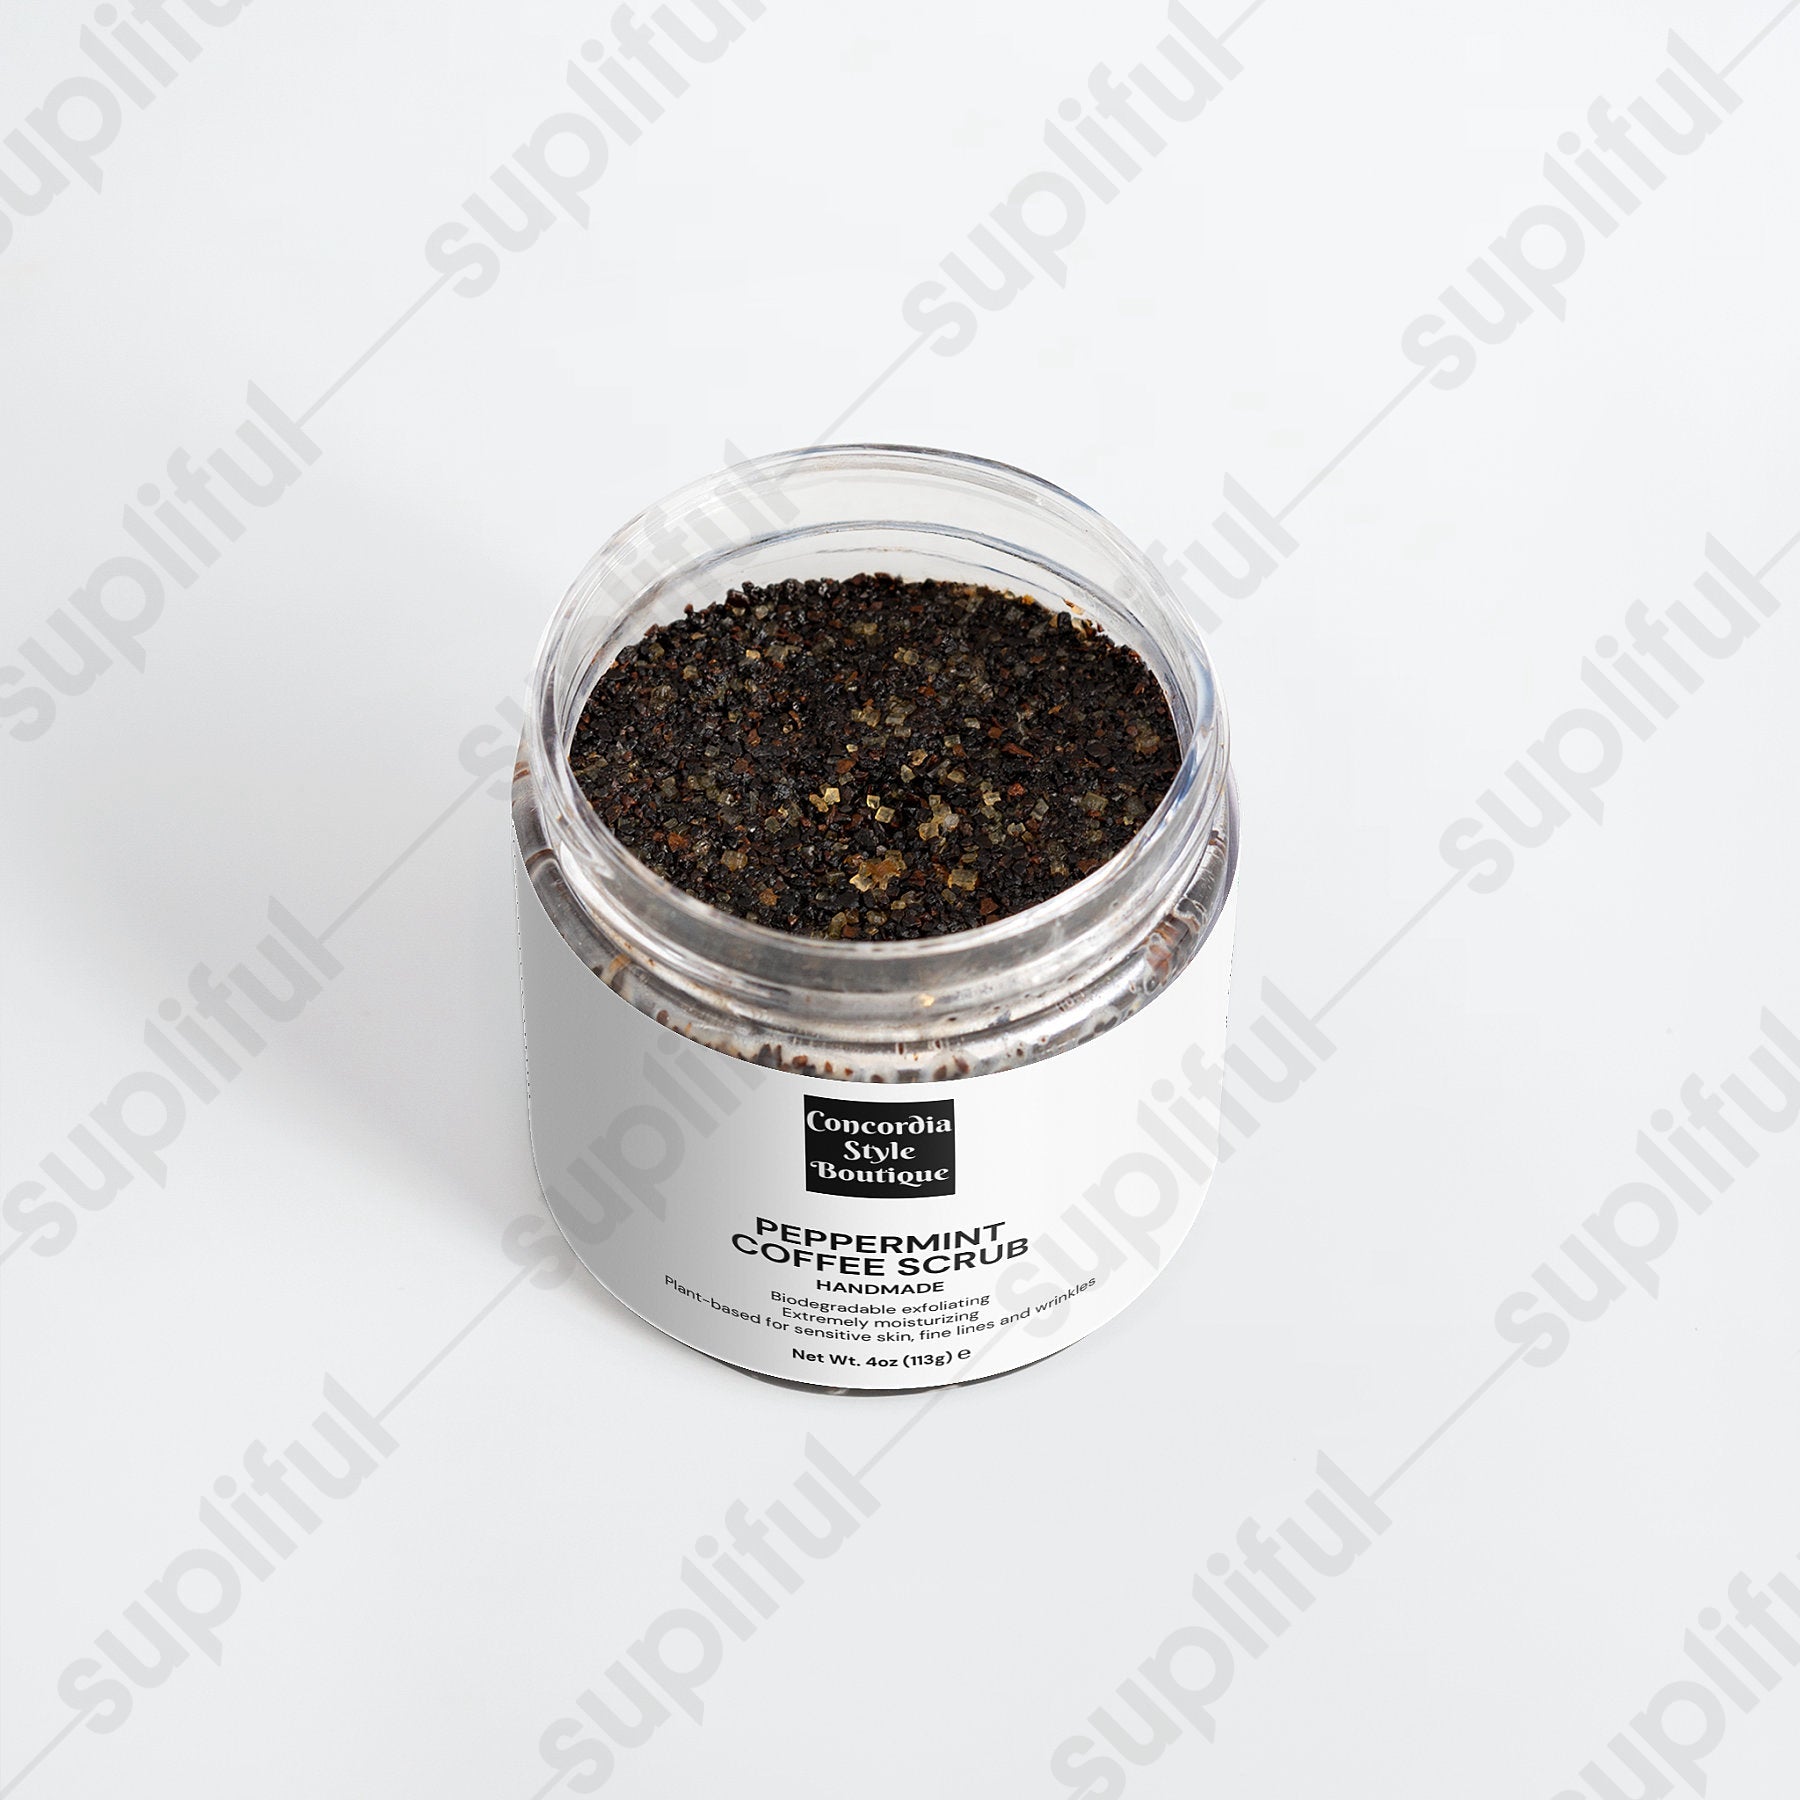 Peppermint Coffee Scrub - Ships exclusively to US - Premium Peppermint Coffee Scrub from Concordia Style Boutique - Just $14.55! Shop now at Concordia Style Boutique